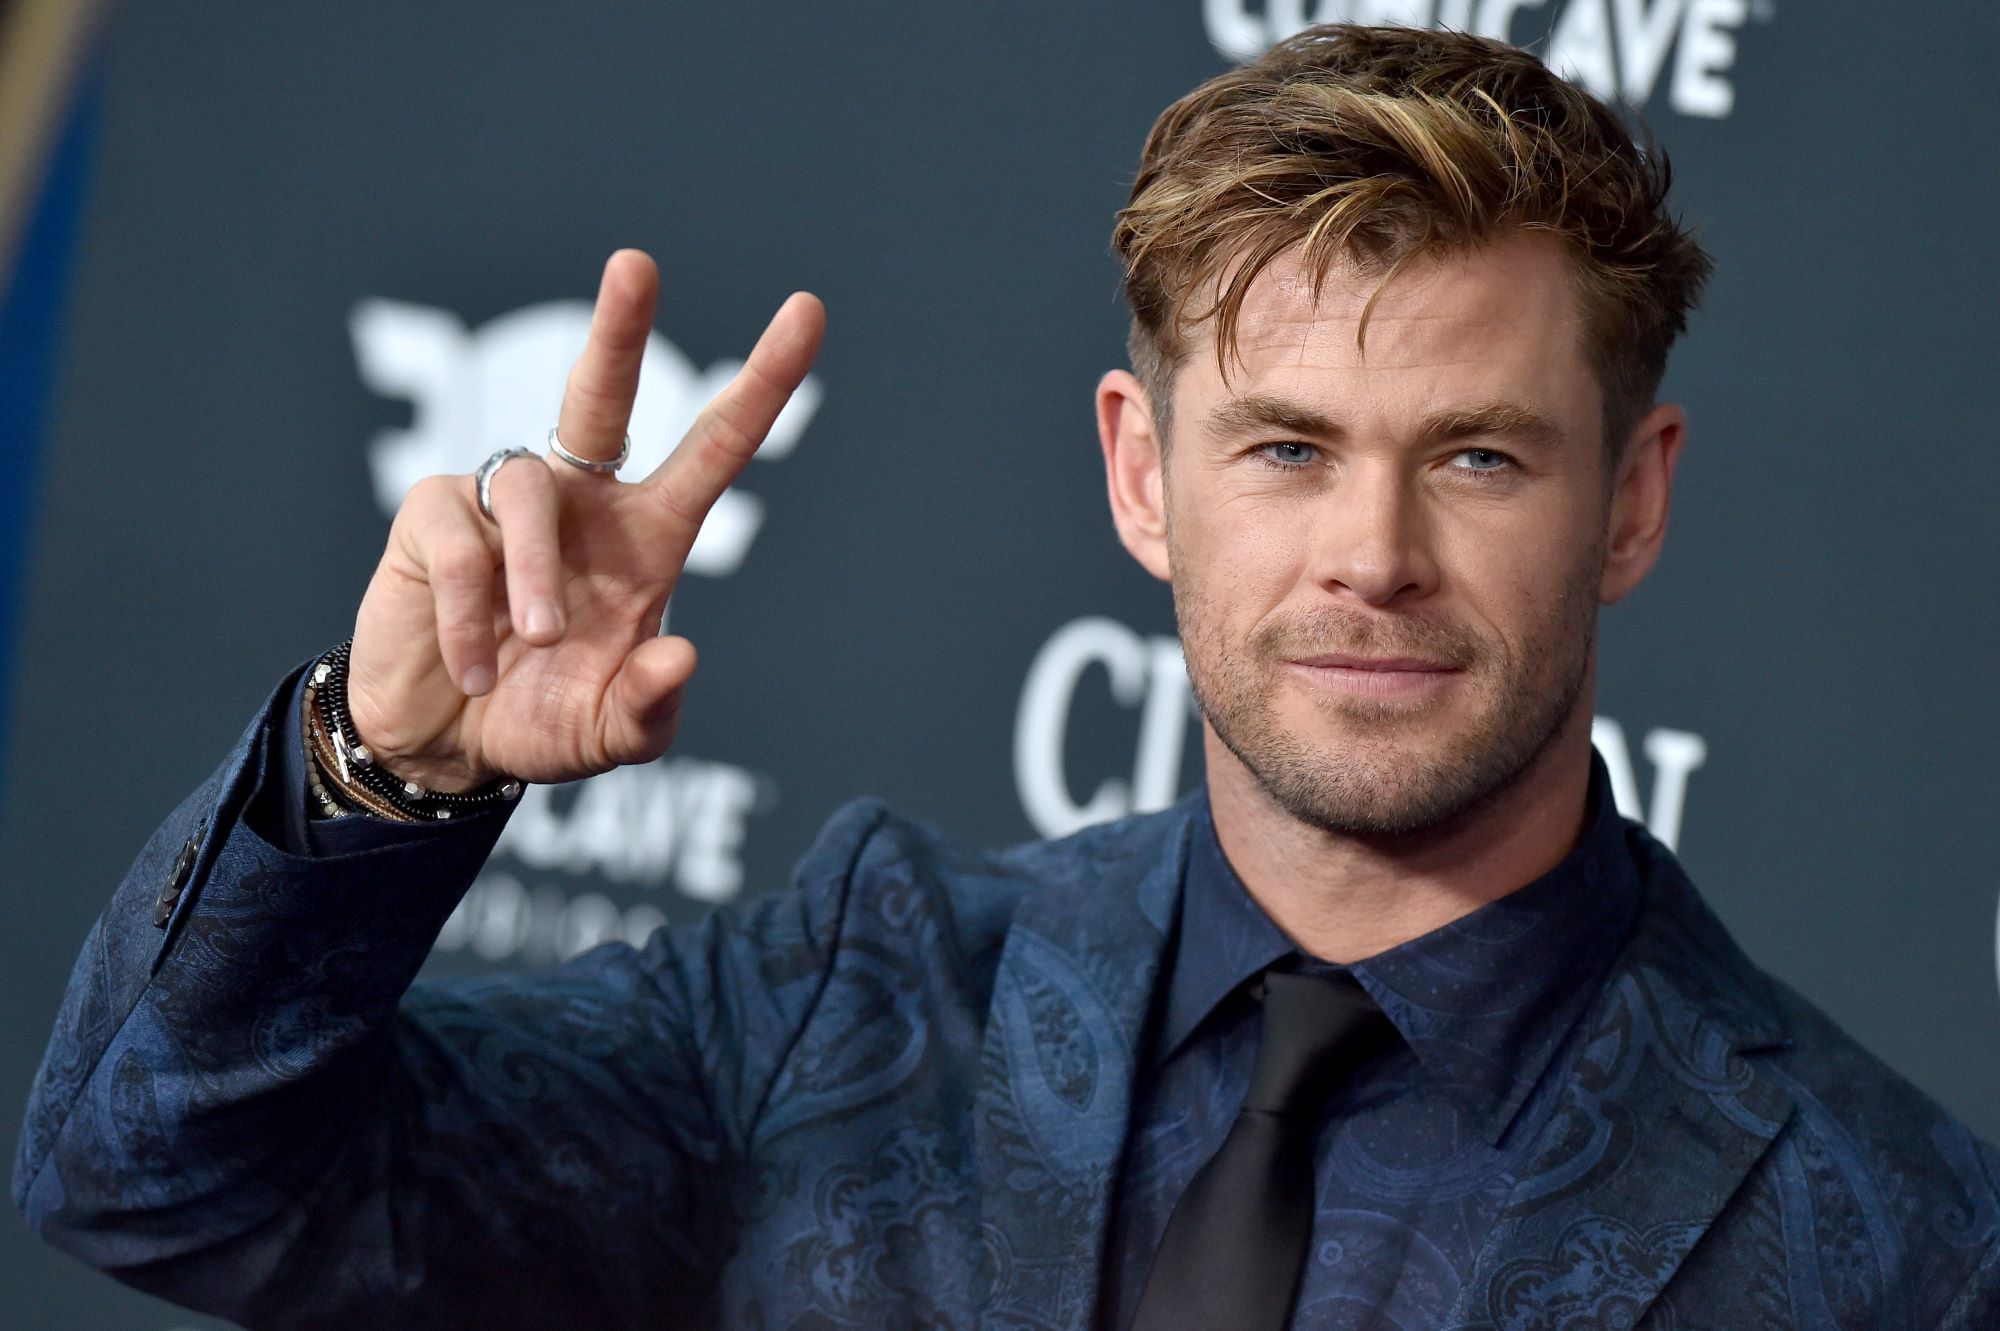 Chris Hemsworth, star of 'Thor: Love and Thunder,' which still hasn't released its trailer, holds up a peace sign while wearing a dark blue paisley suit and black tie.